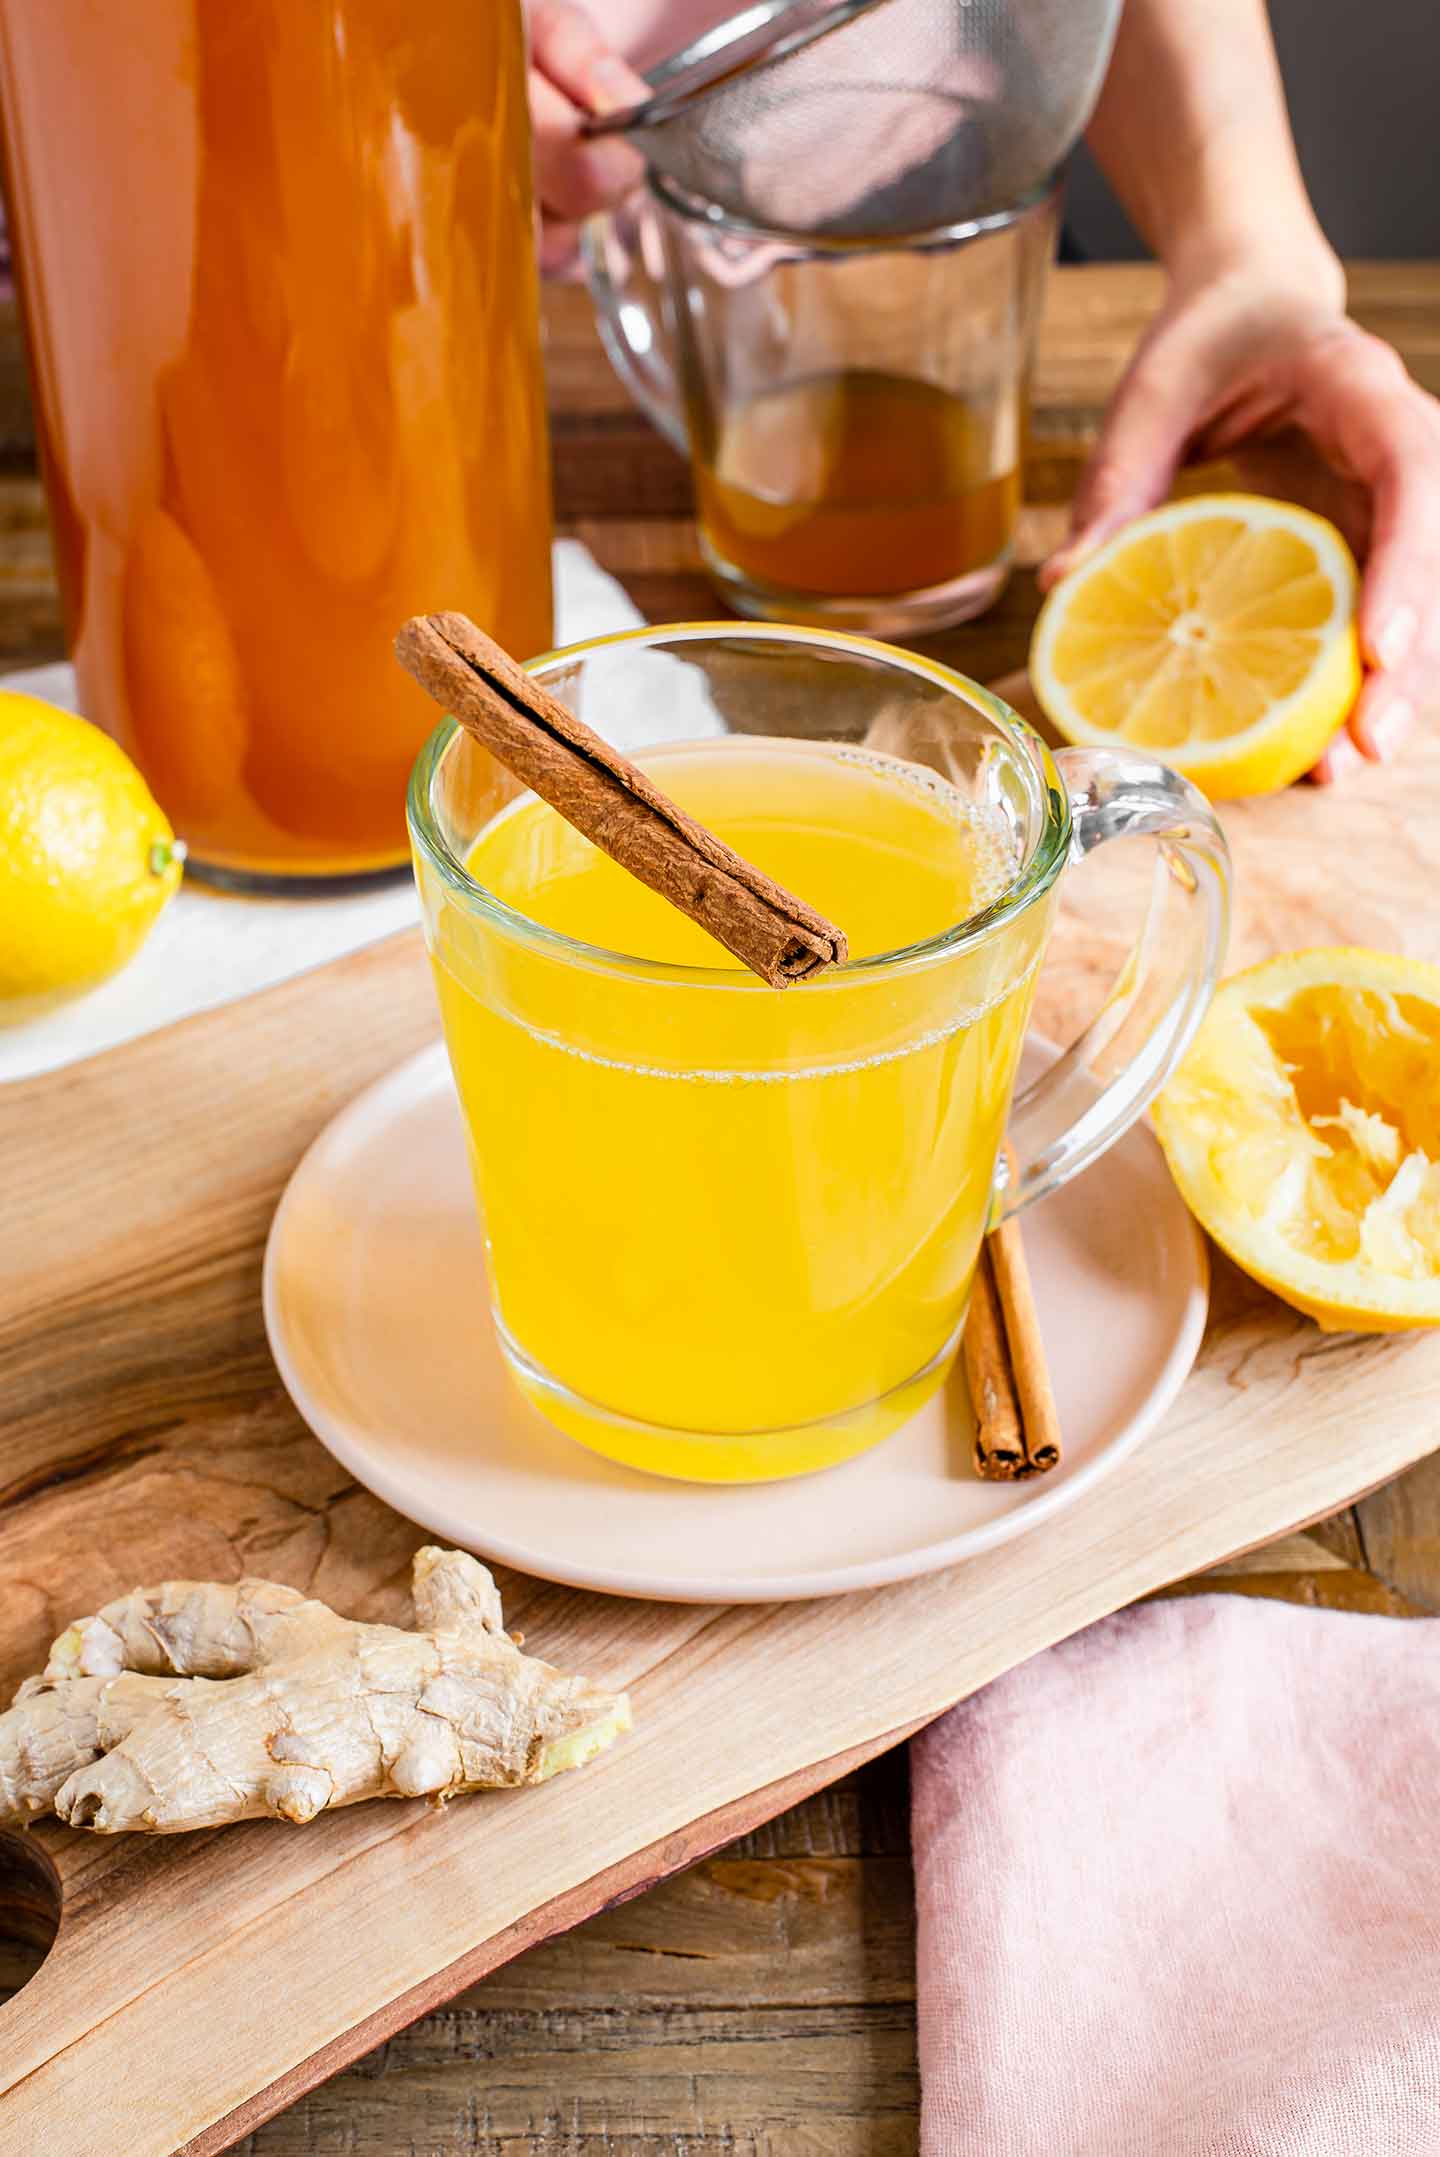 Side view of a bright yellow tea in a glass mug. Fresh ginger root and lemon surround the mug. A cinnamon stick rests on the rim.